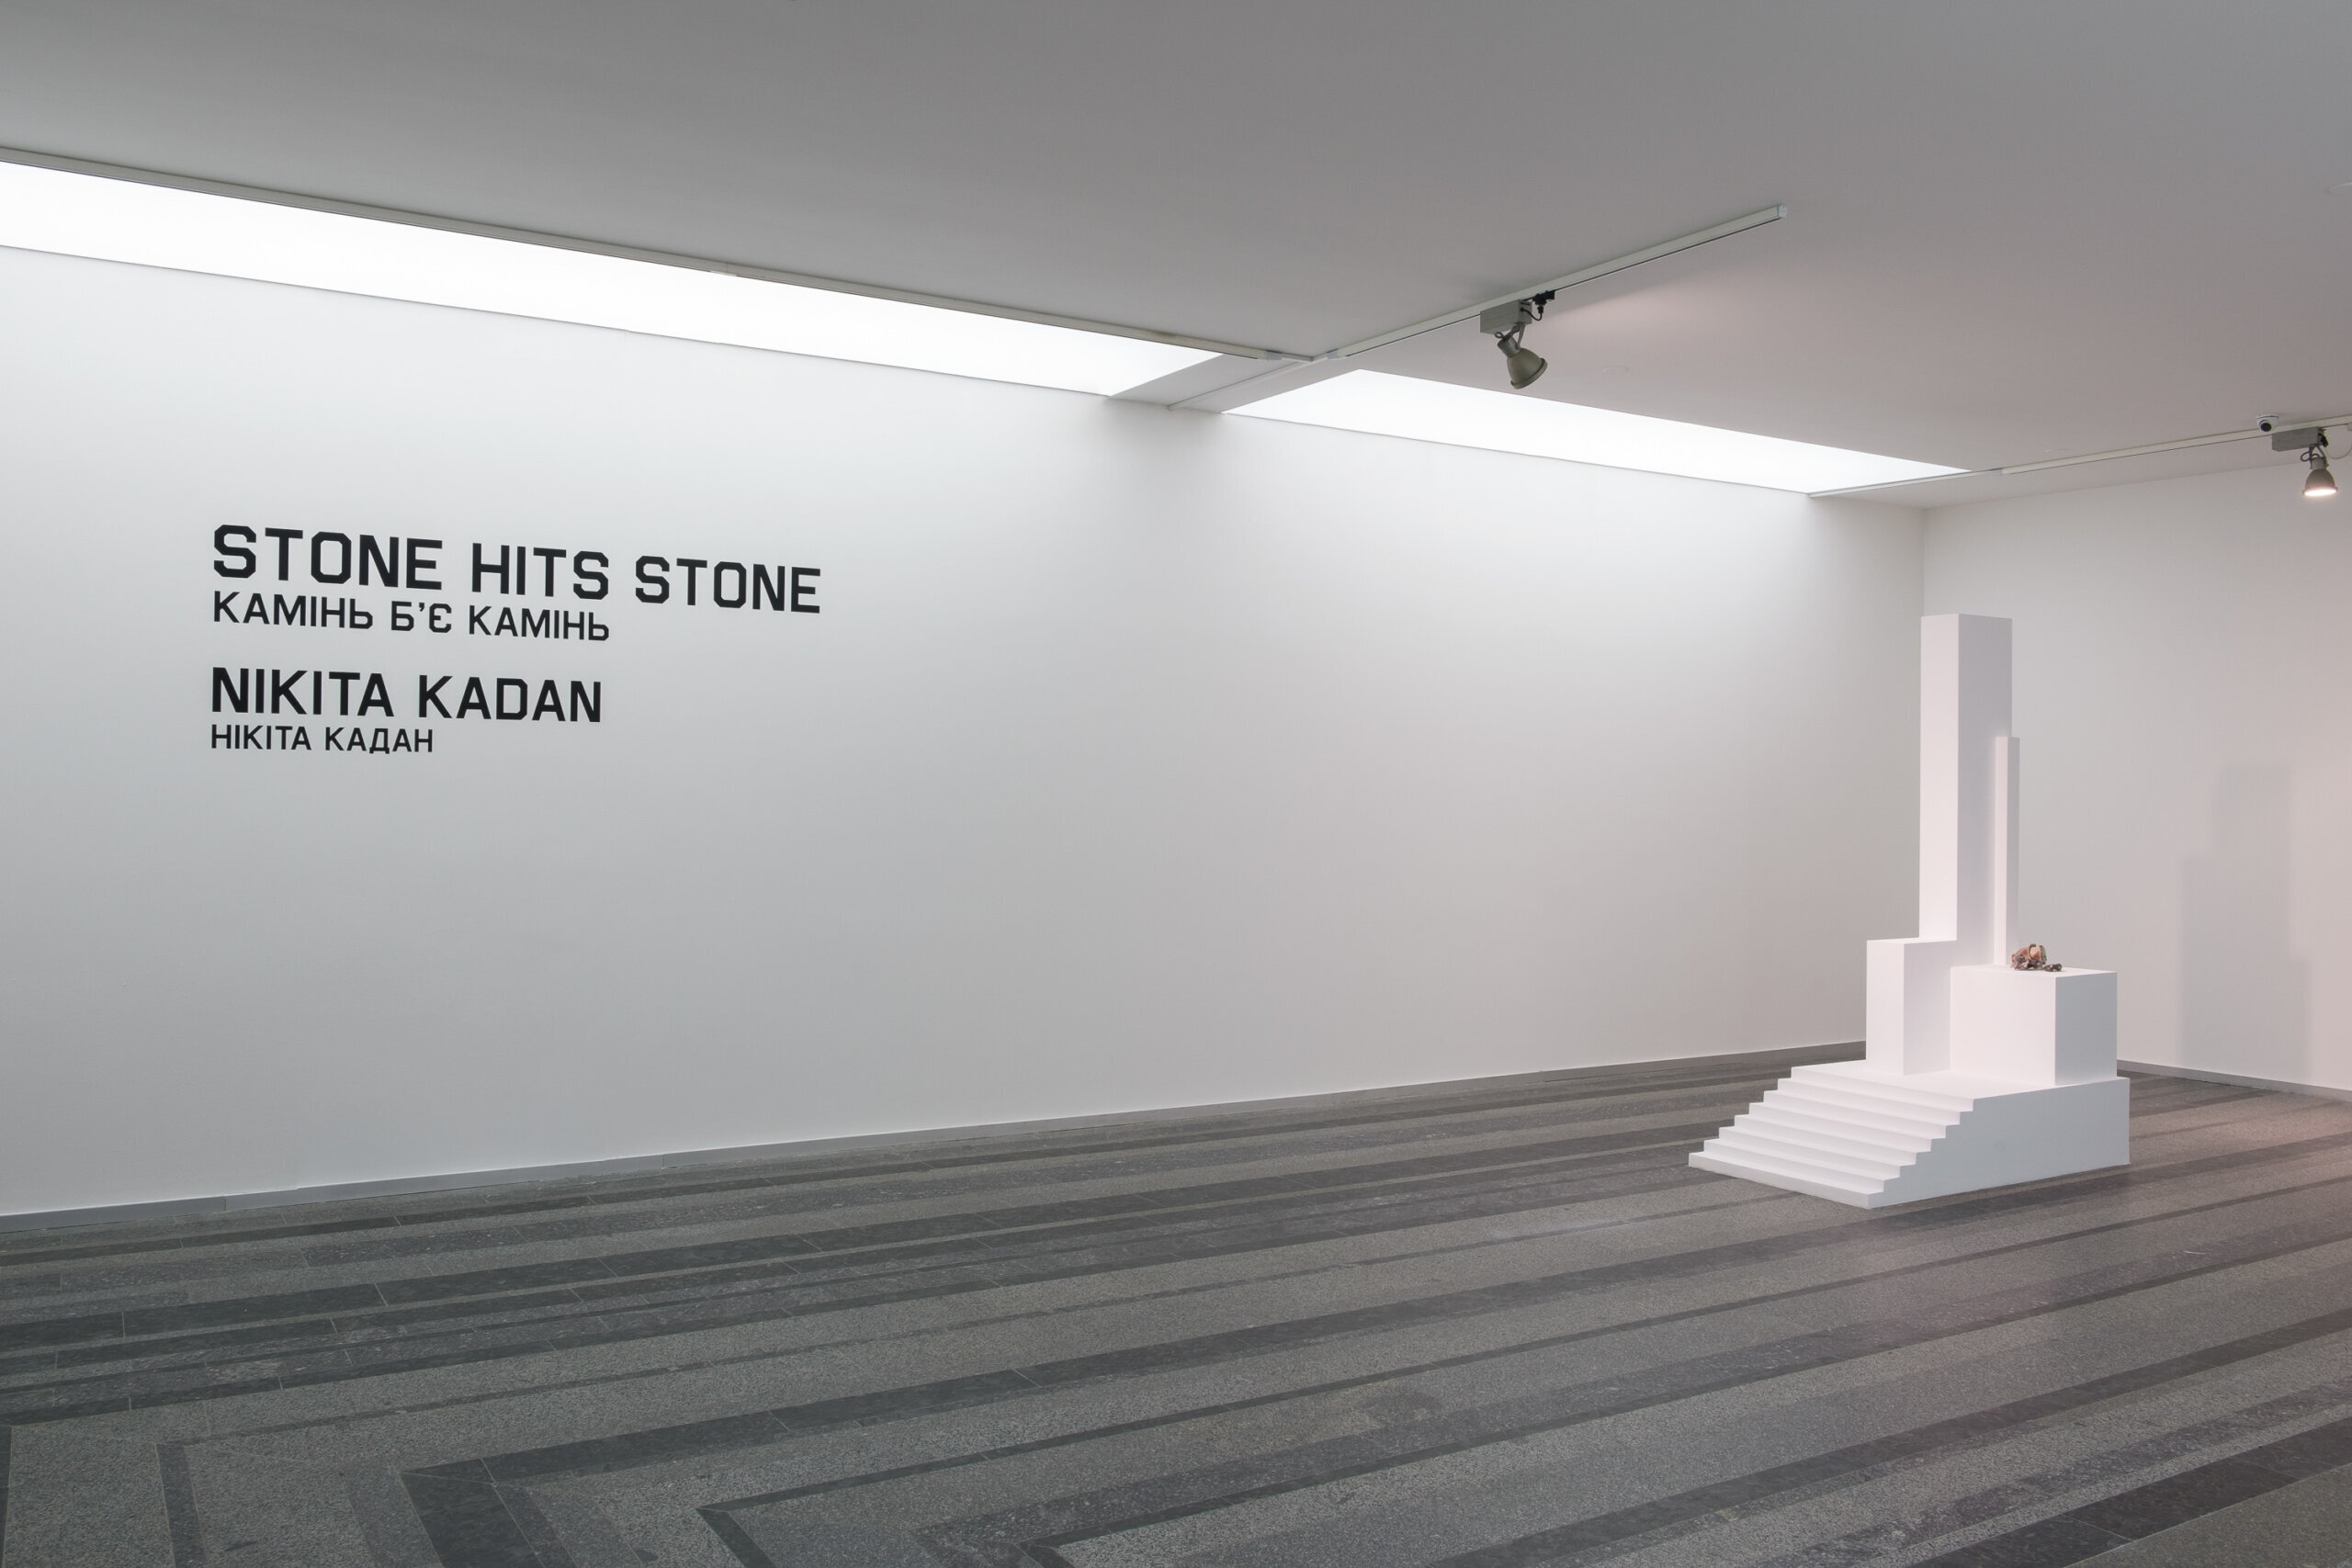 The current exhibition at Kyiv’s Pinchuk Art Center “Stone Hits Stone” combines Nikita Kadan’s latest and early artworks and will run through middle August.